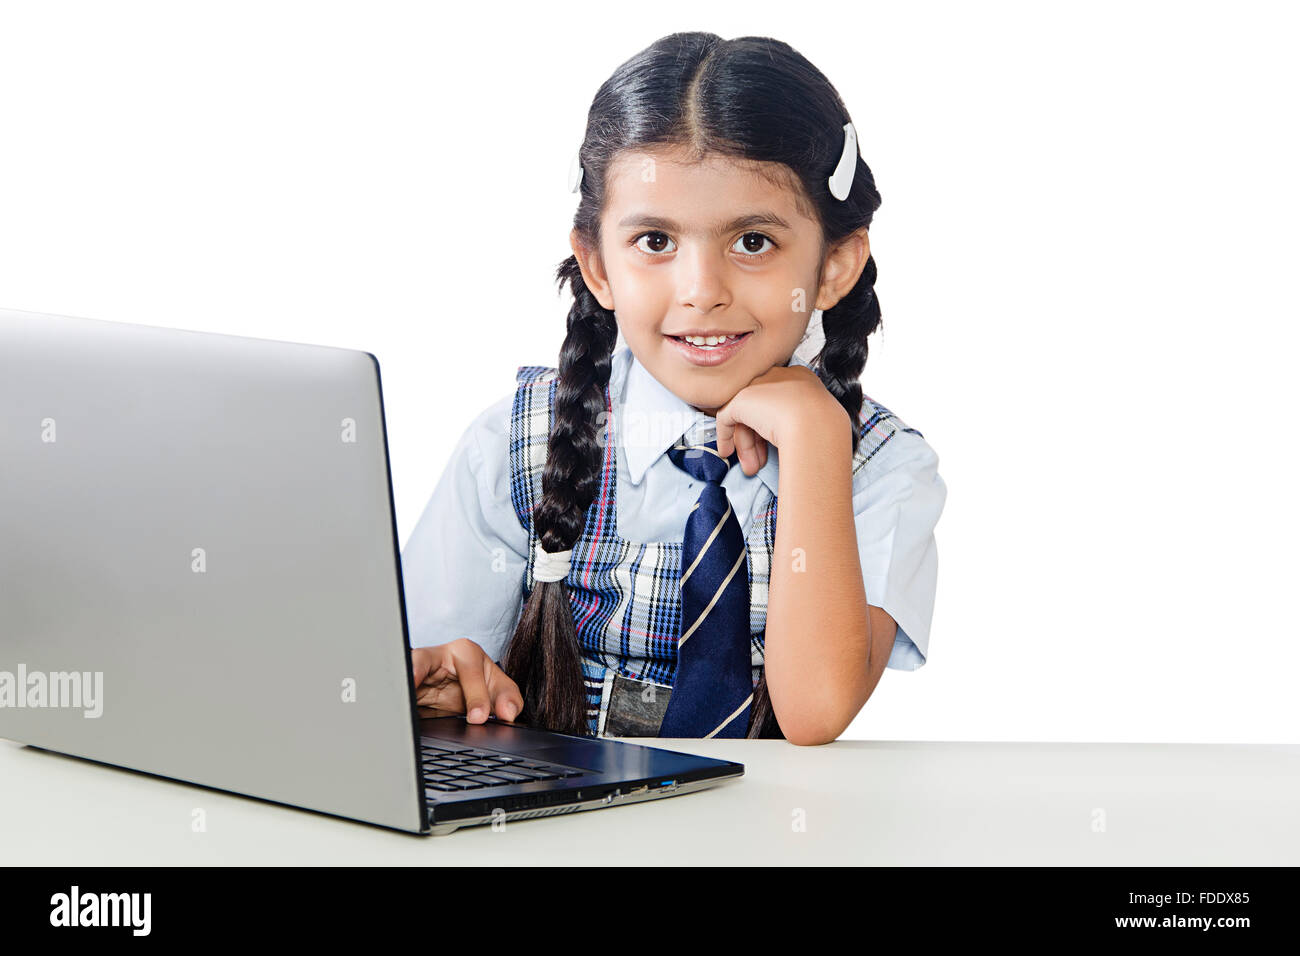 1 Person Only E-Learning Girl Kid Laptop School Sitting Smiling Student Studying Stock Photo